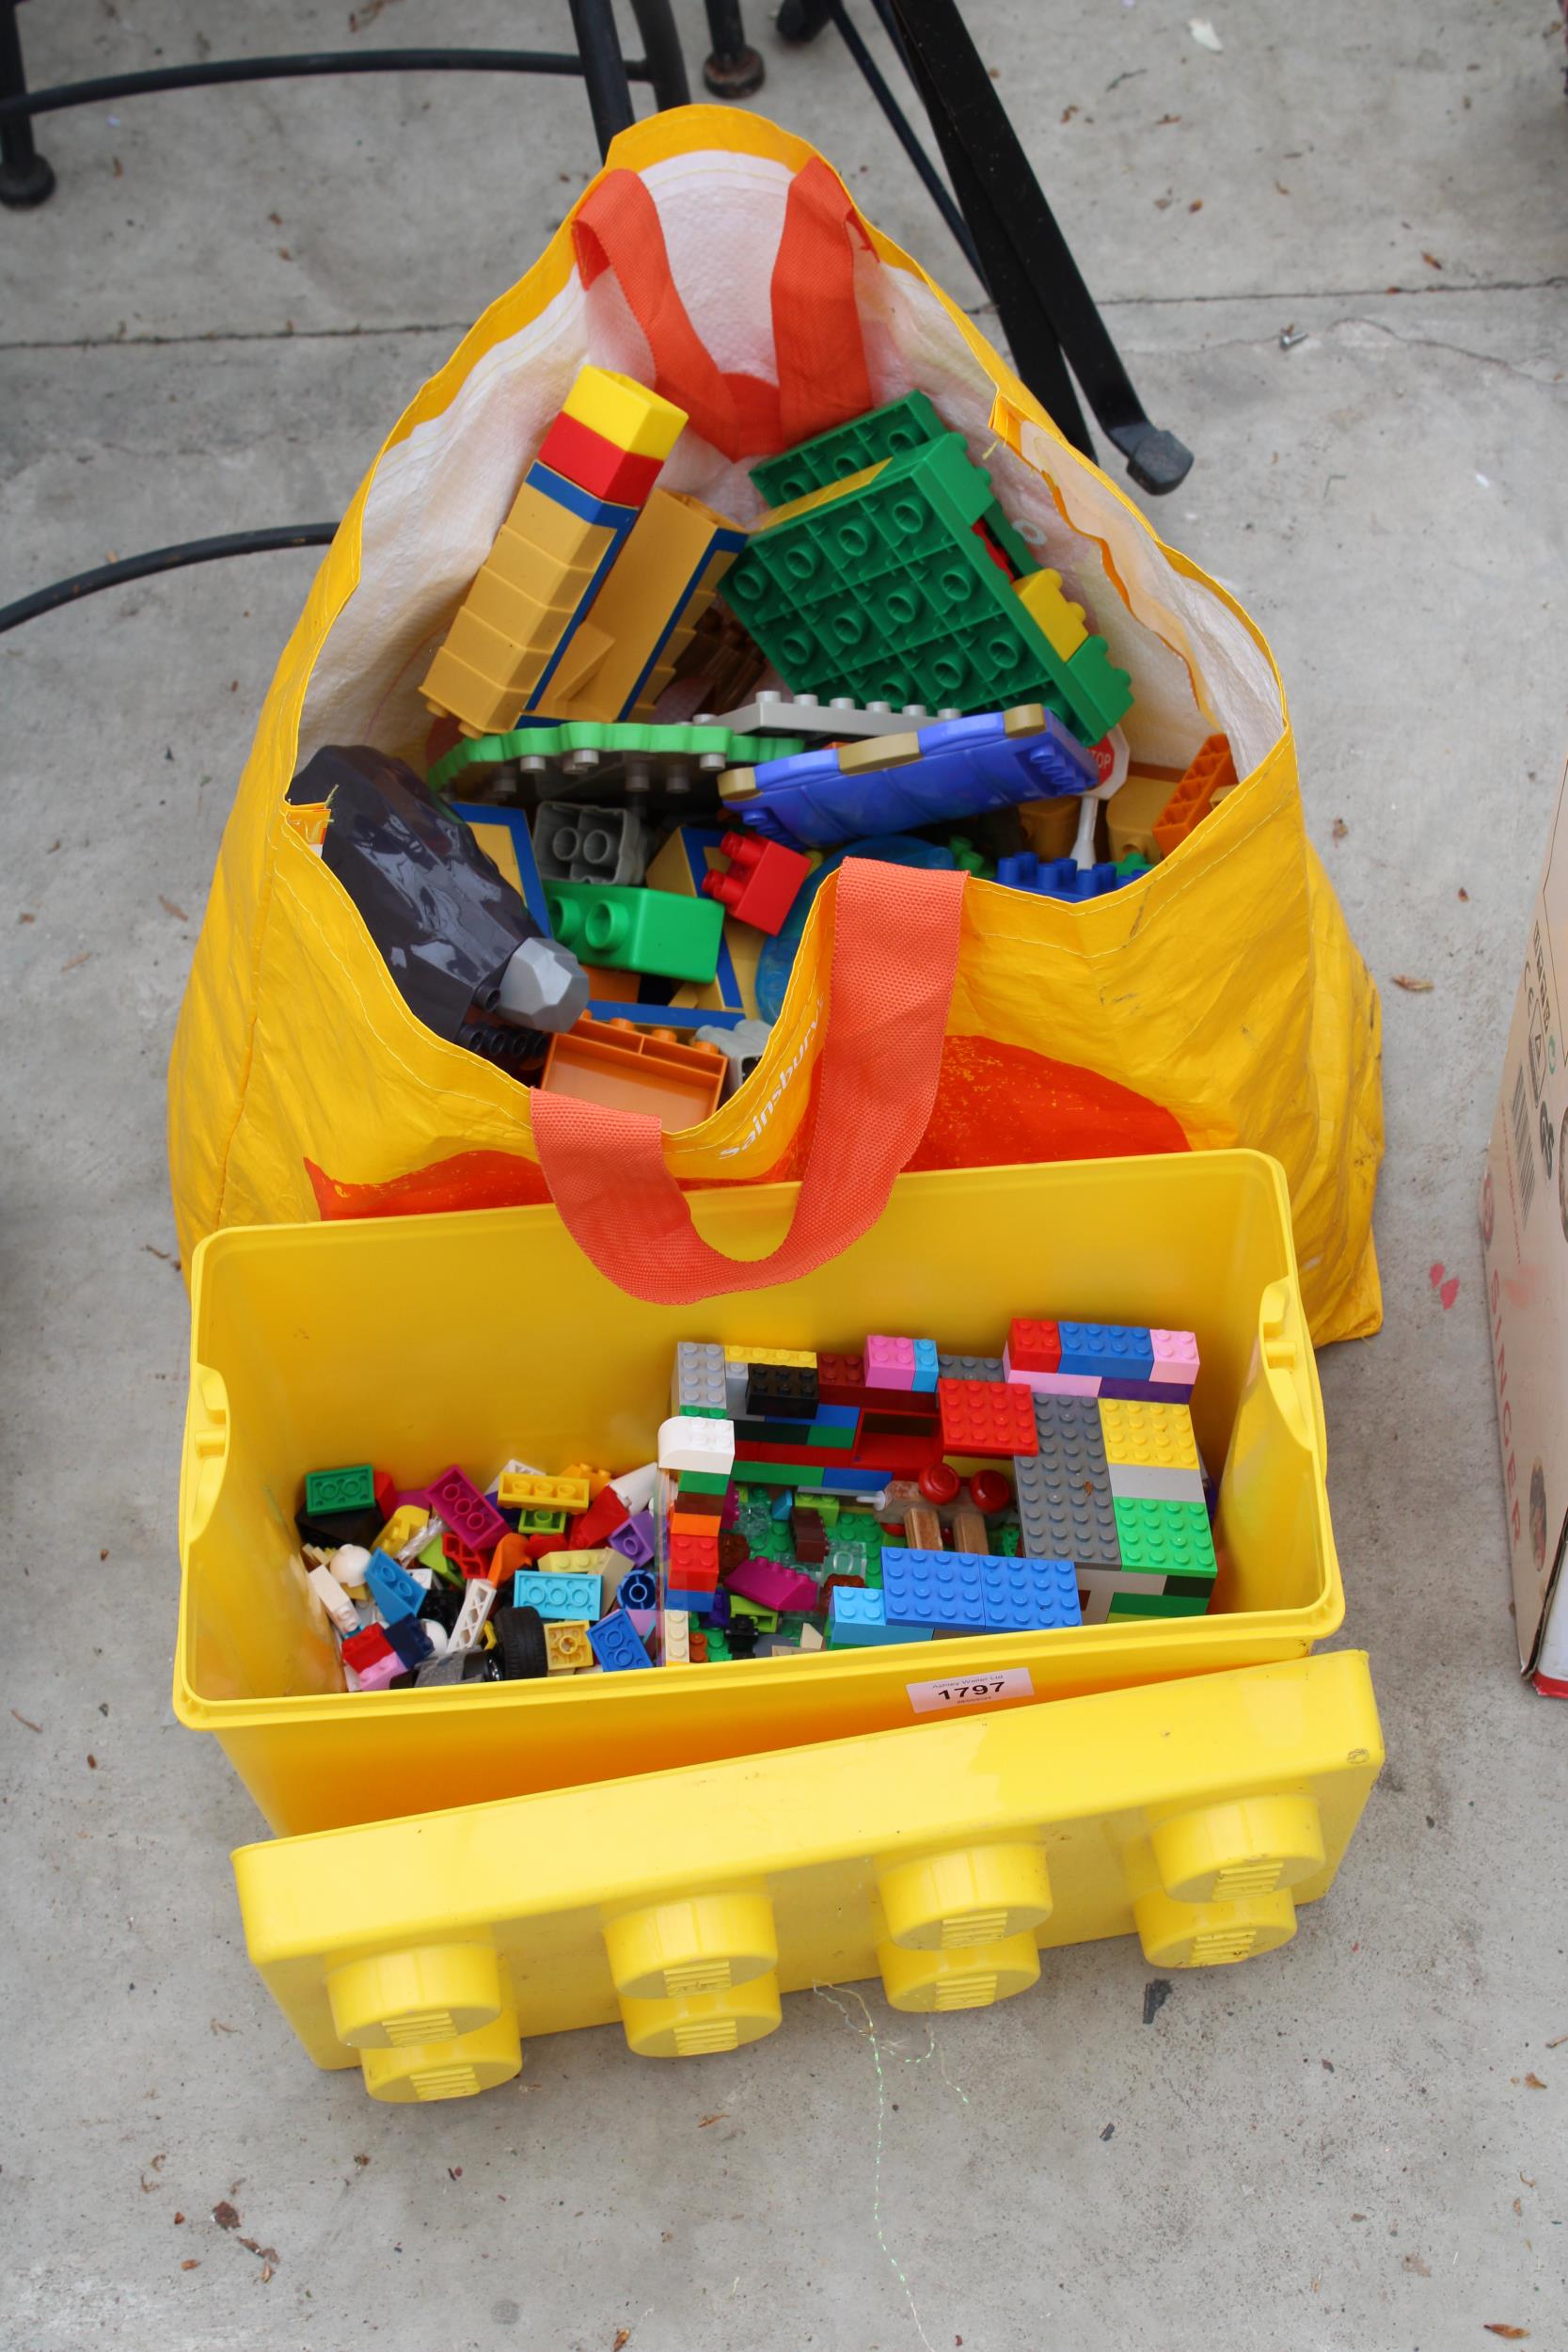 AN ASSORTMENT OF LEGO AND DUPLO STYLE MEGA BLOCKS